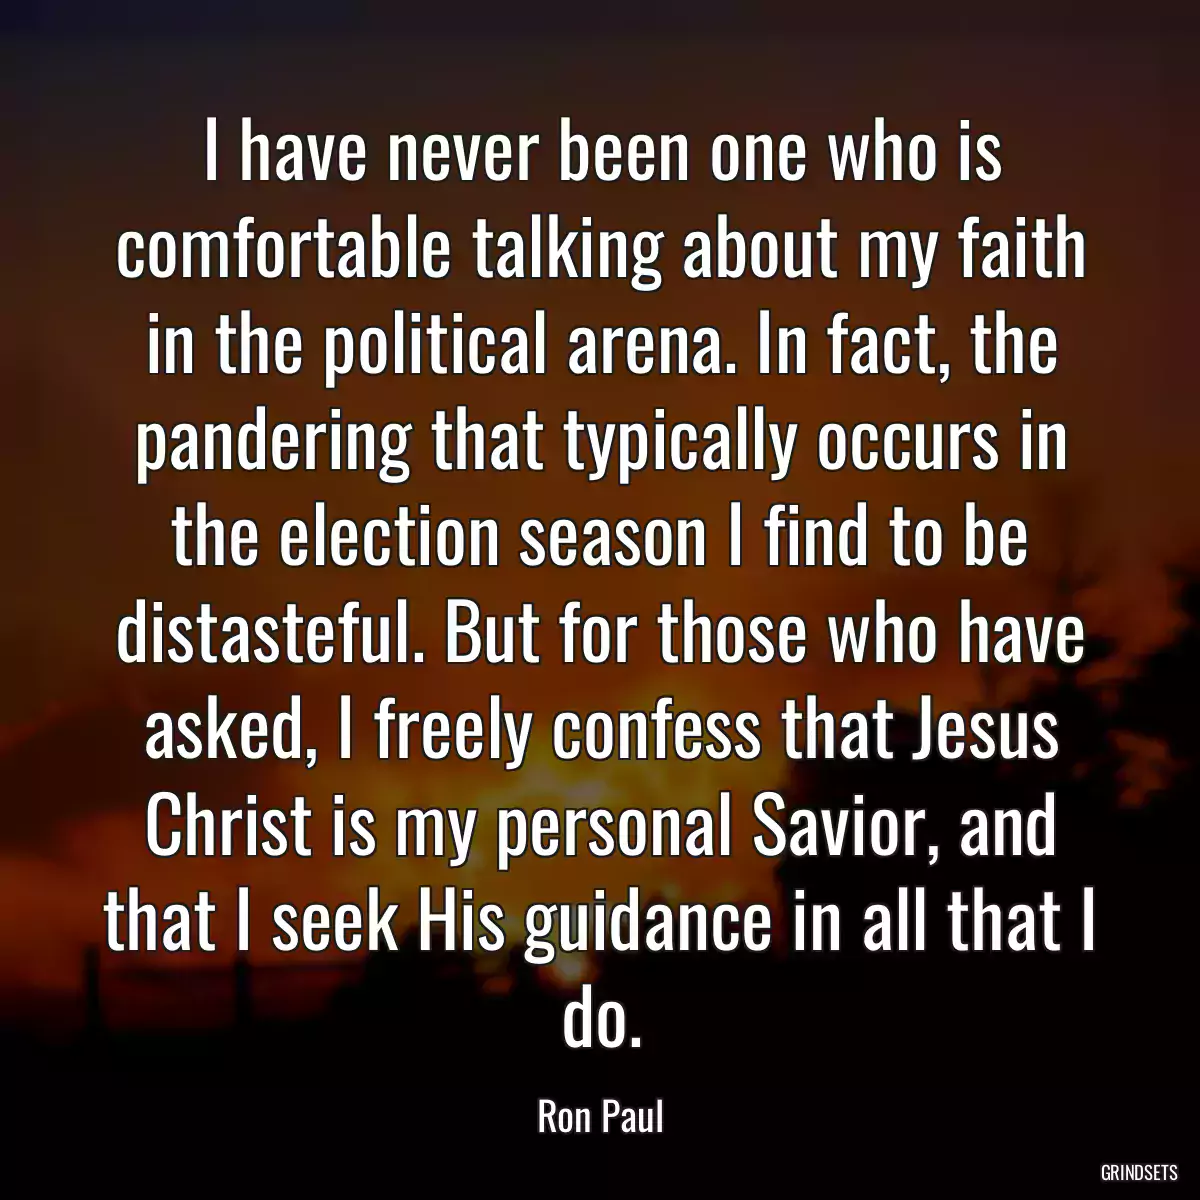 I have never been one who is comfortable talking about my faith in the political arena. In fact, the pandering that typically occurs in the election season I find to be distasteful. But for those who have asked, I freely confess that Jesus Christ is my personal Savior, and that I seek His guidance in all that I do.